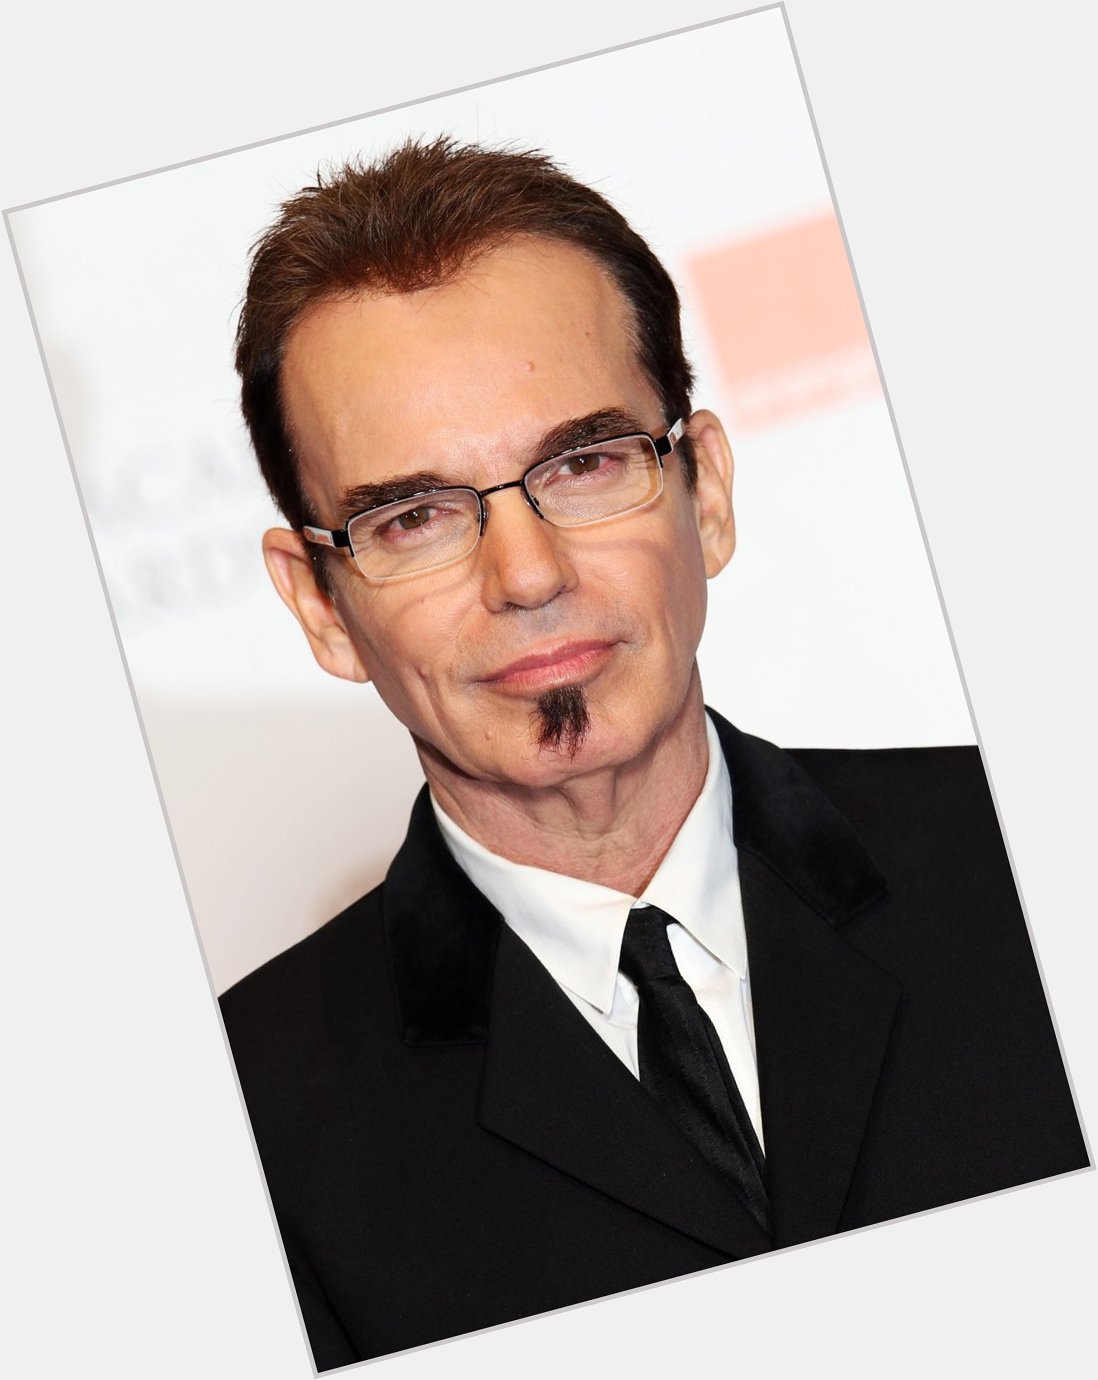 Happy 65th Birthday To Billy Bob Thornton! The Actor Who Voiced CatDog\s Dad From CatDog. 